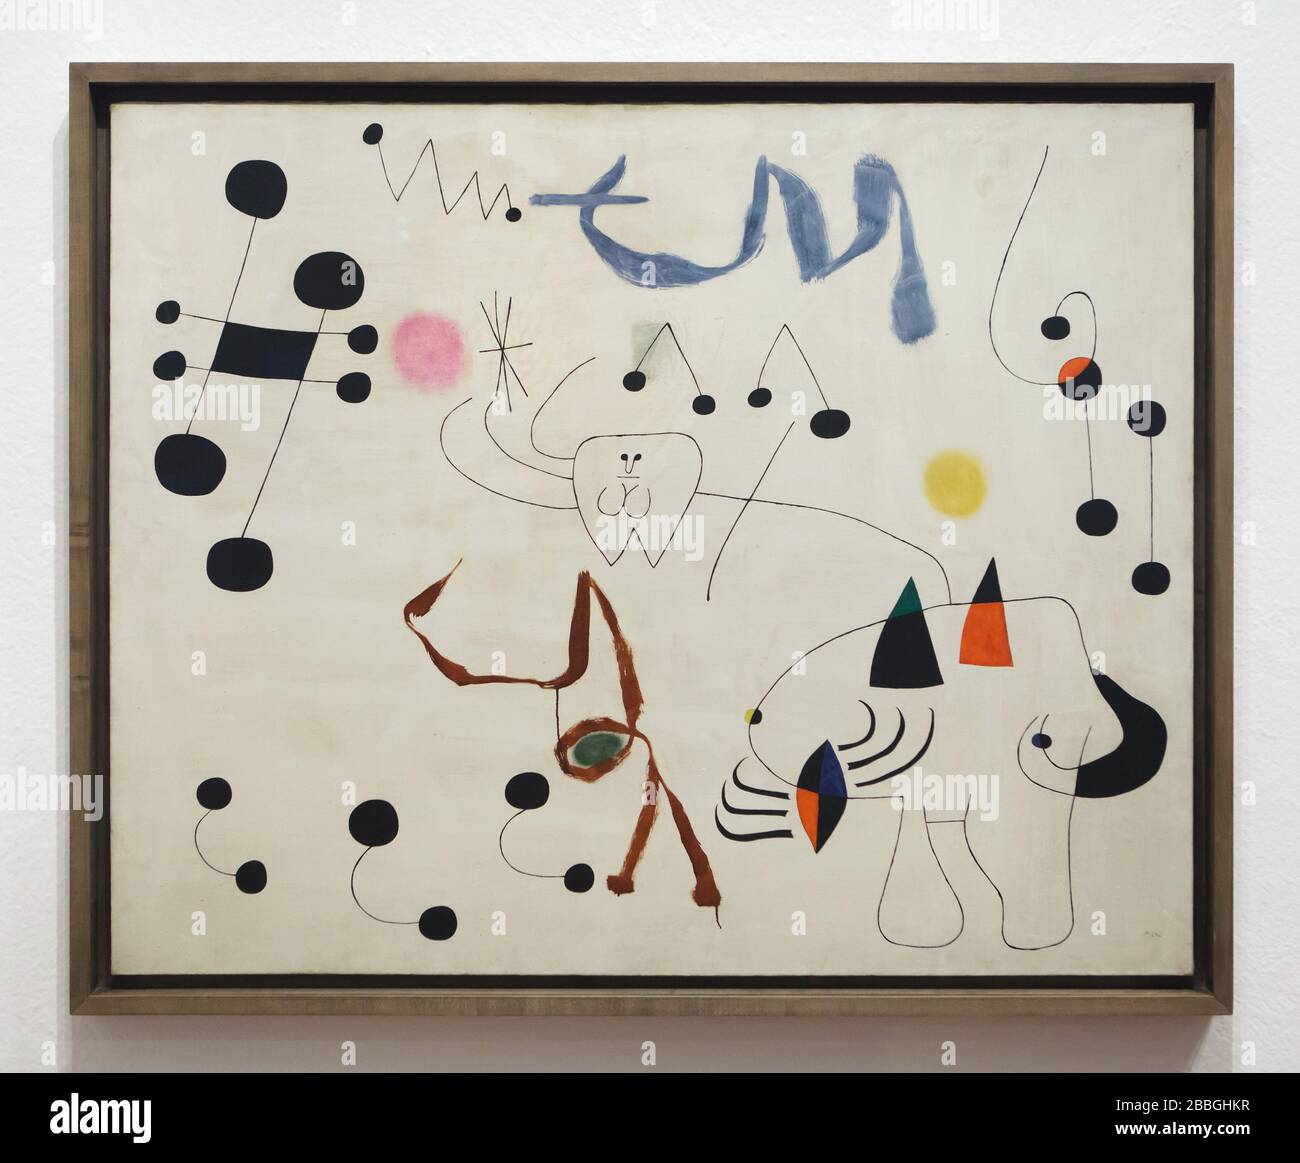 Painting by Spanish modernist painter Joan Miró entitled 'Woman dreaming of escape' (1945) on display in the Fundació Joan Miró (Joan Miró Foundation) in Barcelona, Catalonia, Spain. Stock Photo